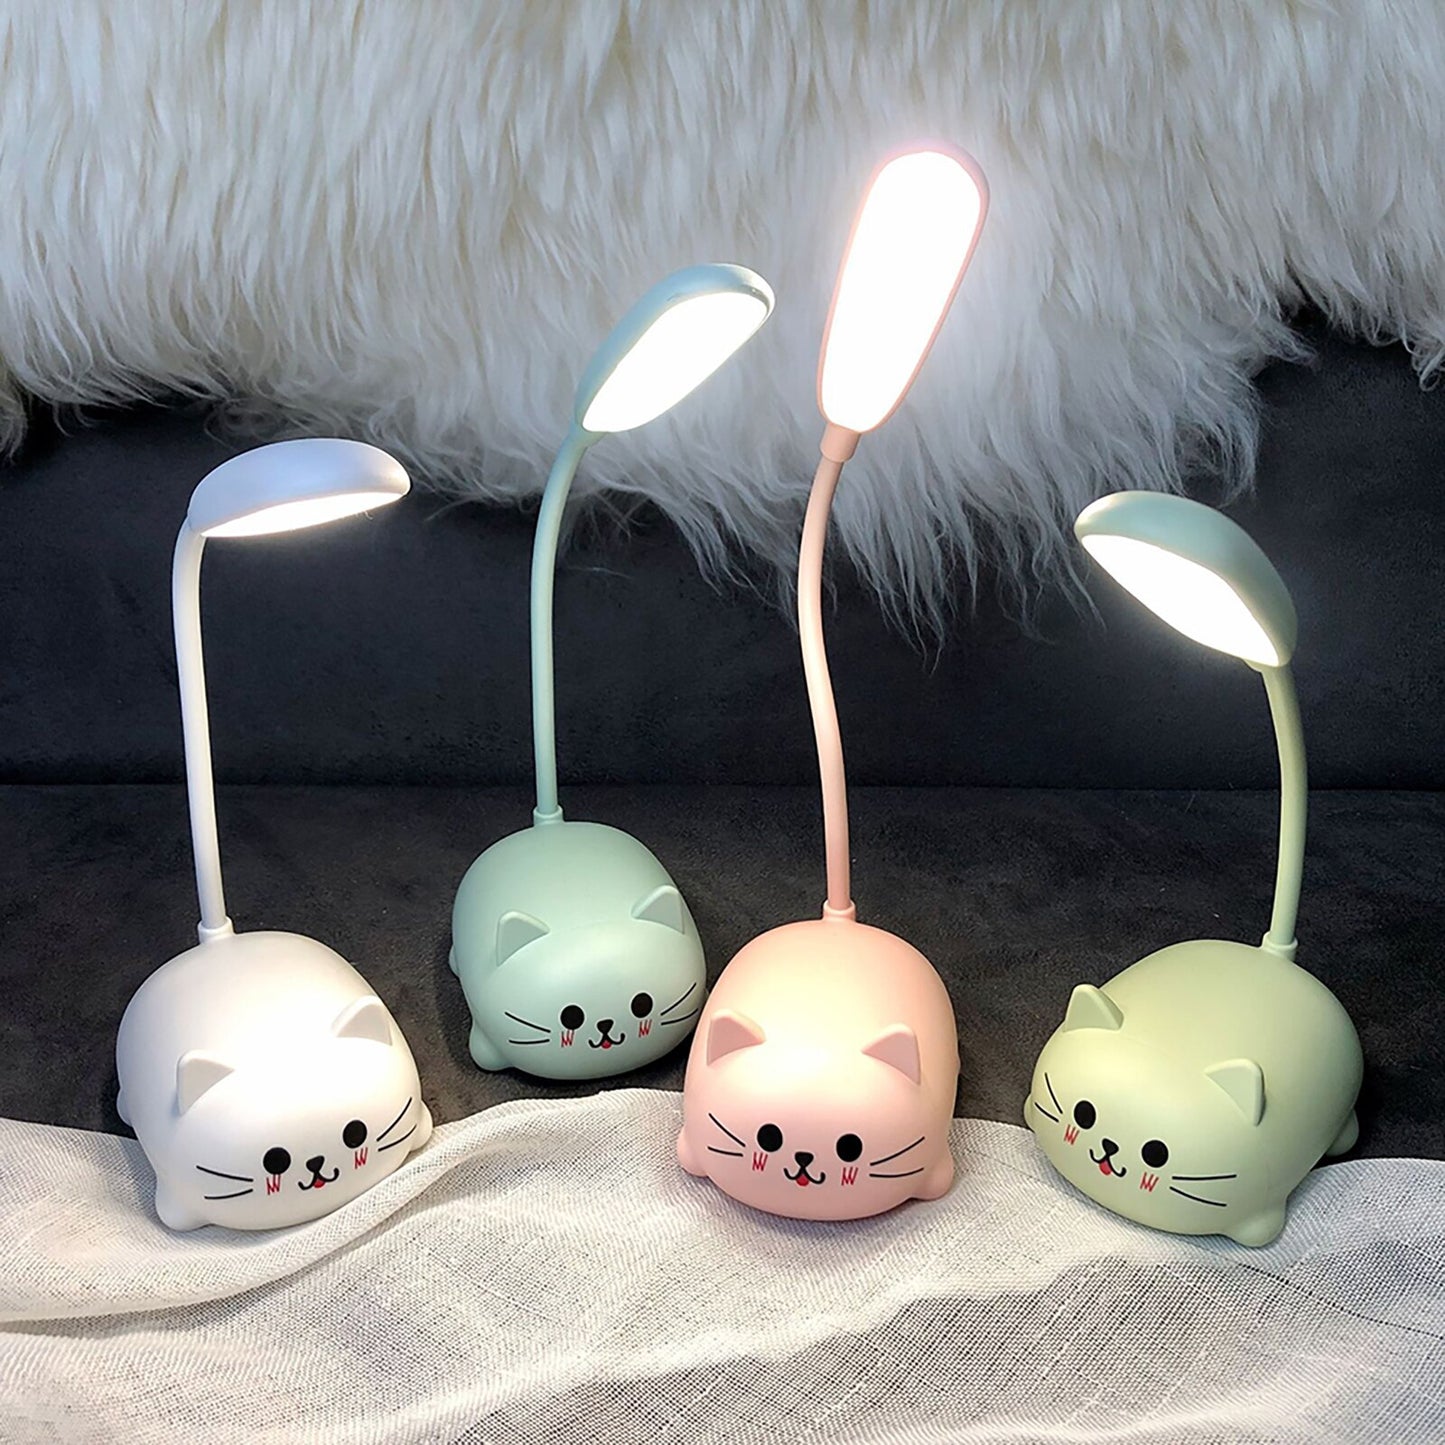 4 Cat Lamps with 360 light